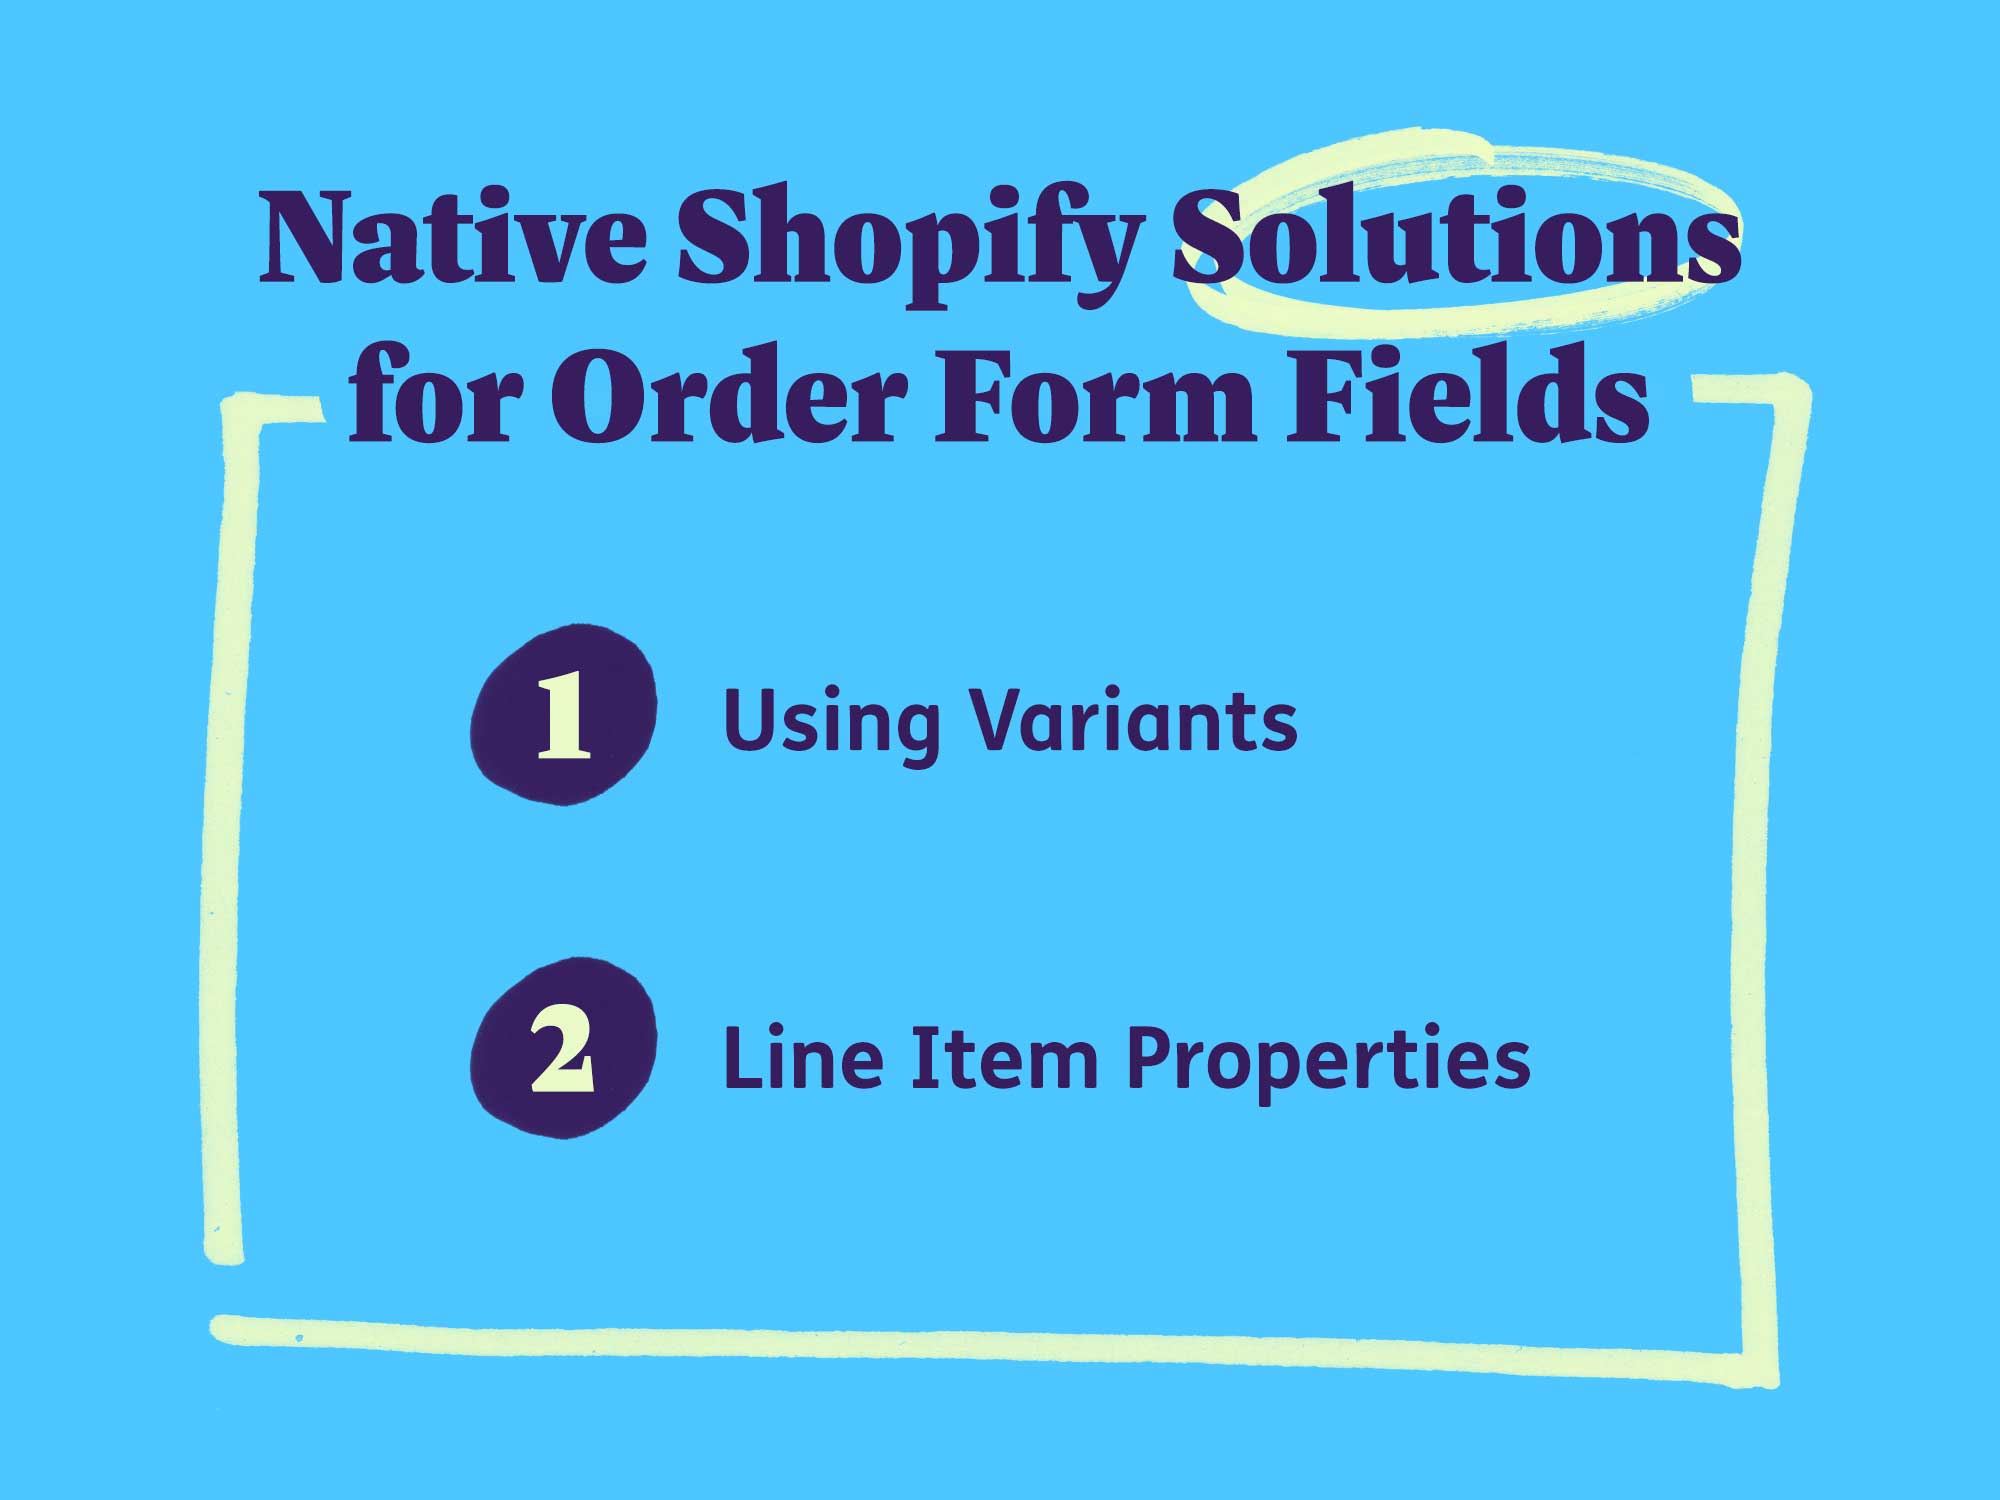 Native Shopify solutions for order form fields: using variants and line item properties